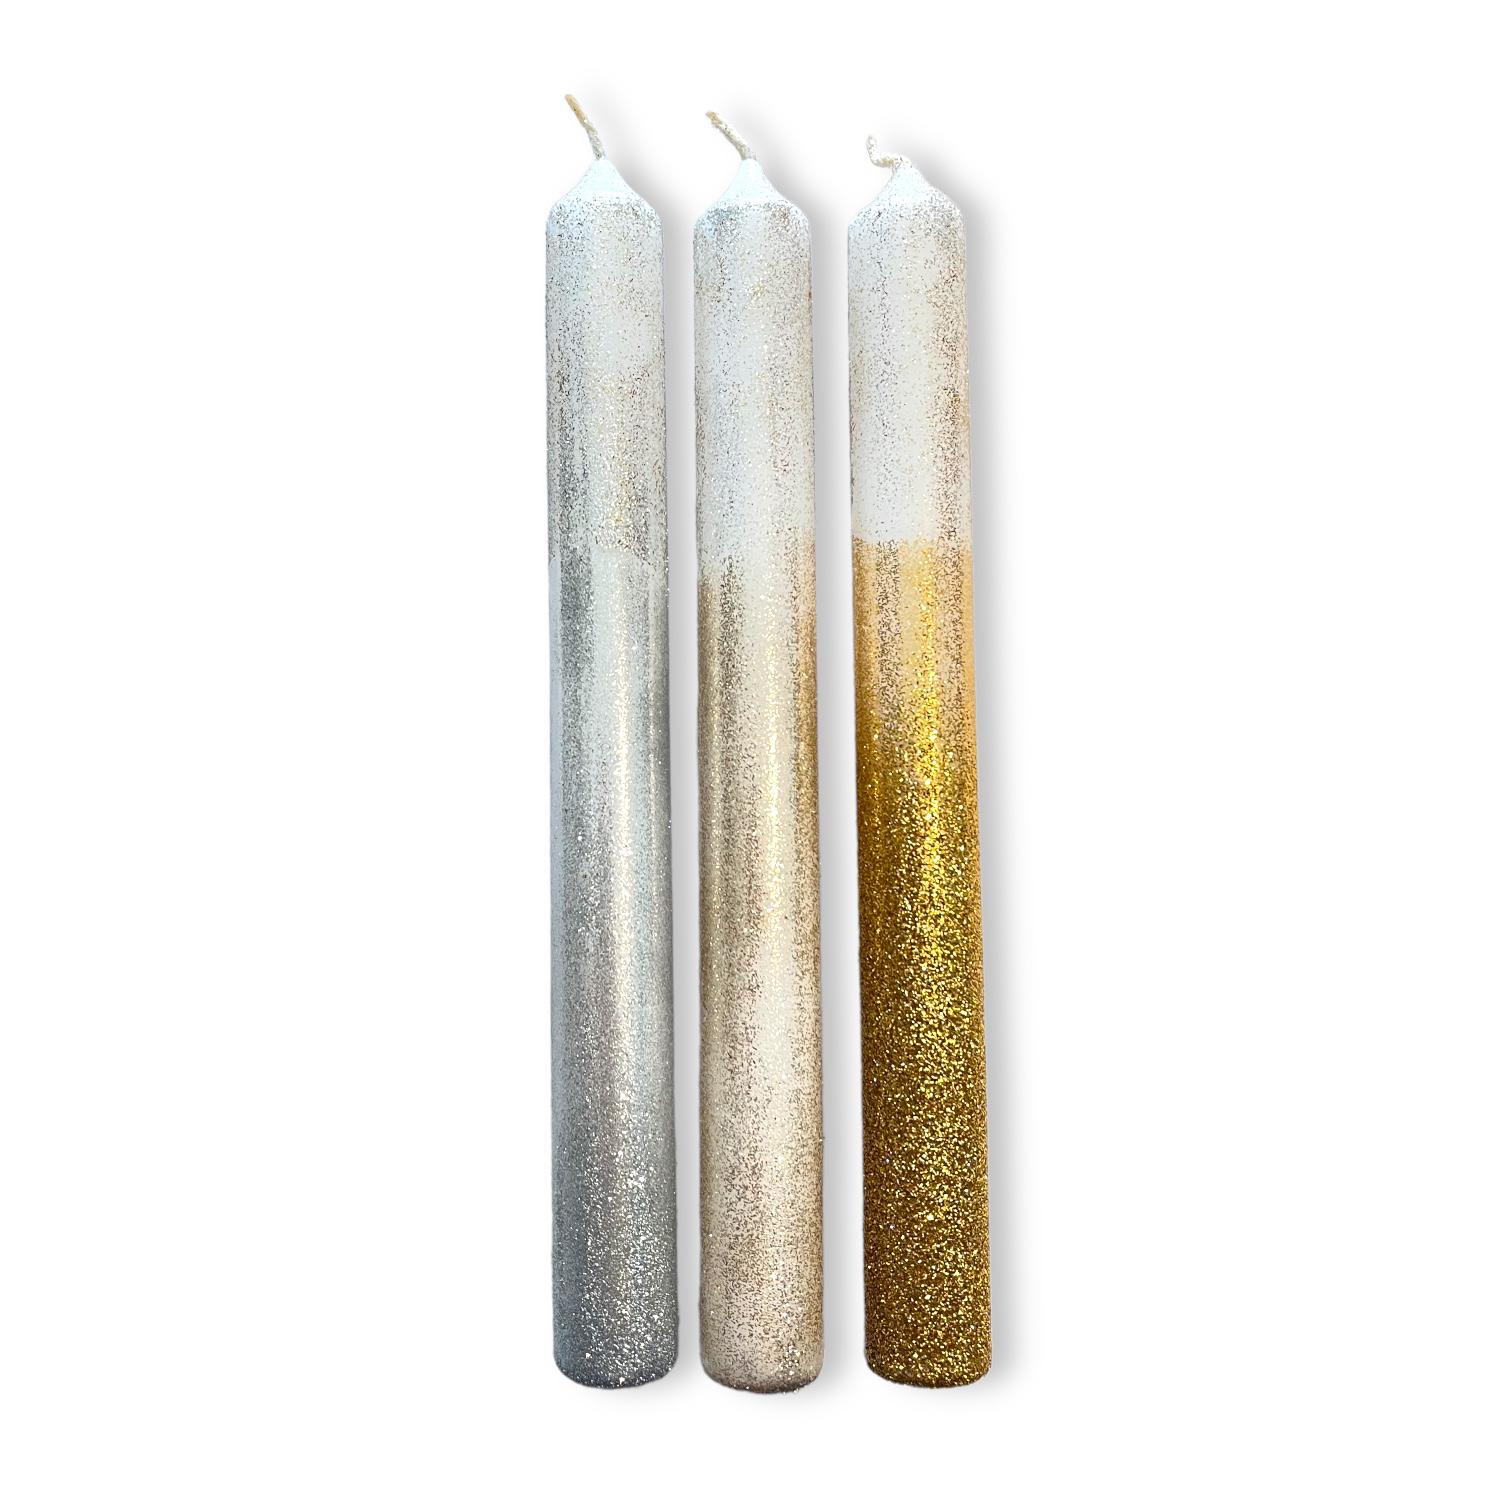 Dip Dye Xmas Glitter holy night candles x 3 by Pink Stories